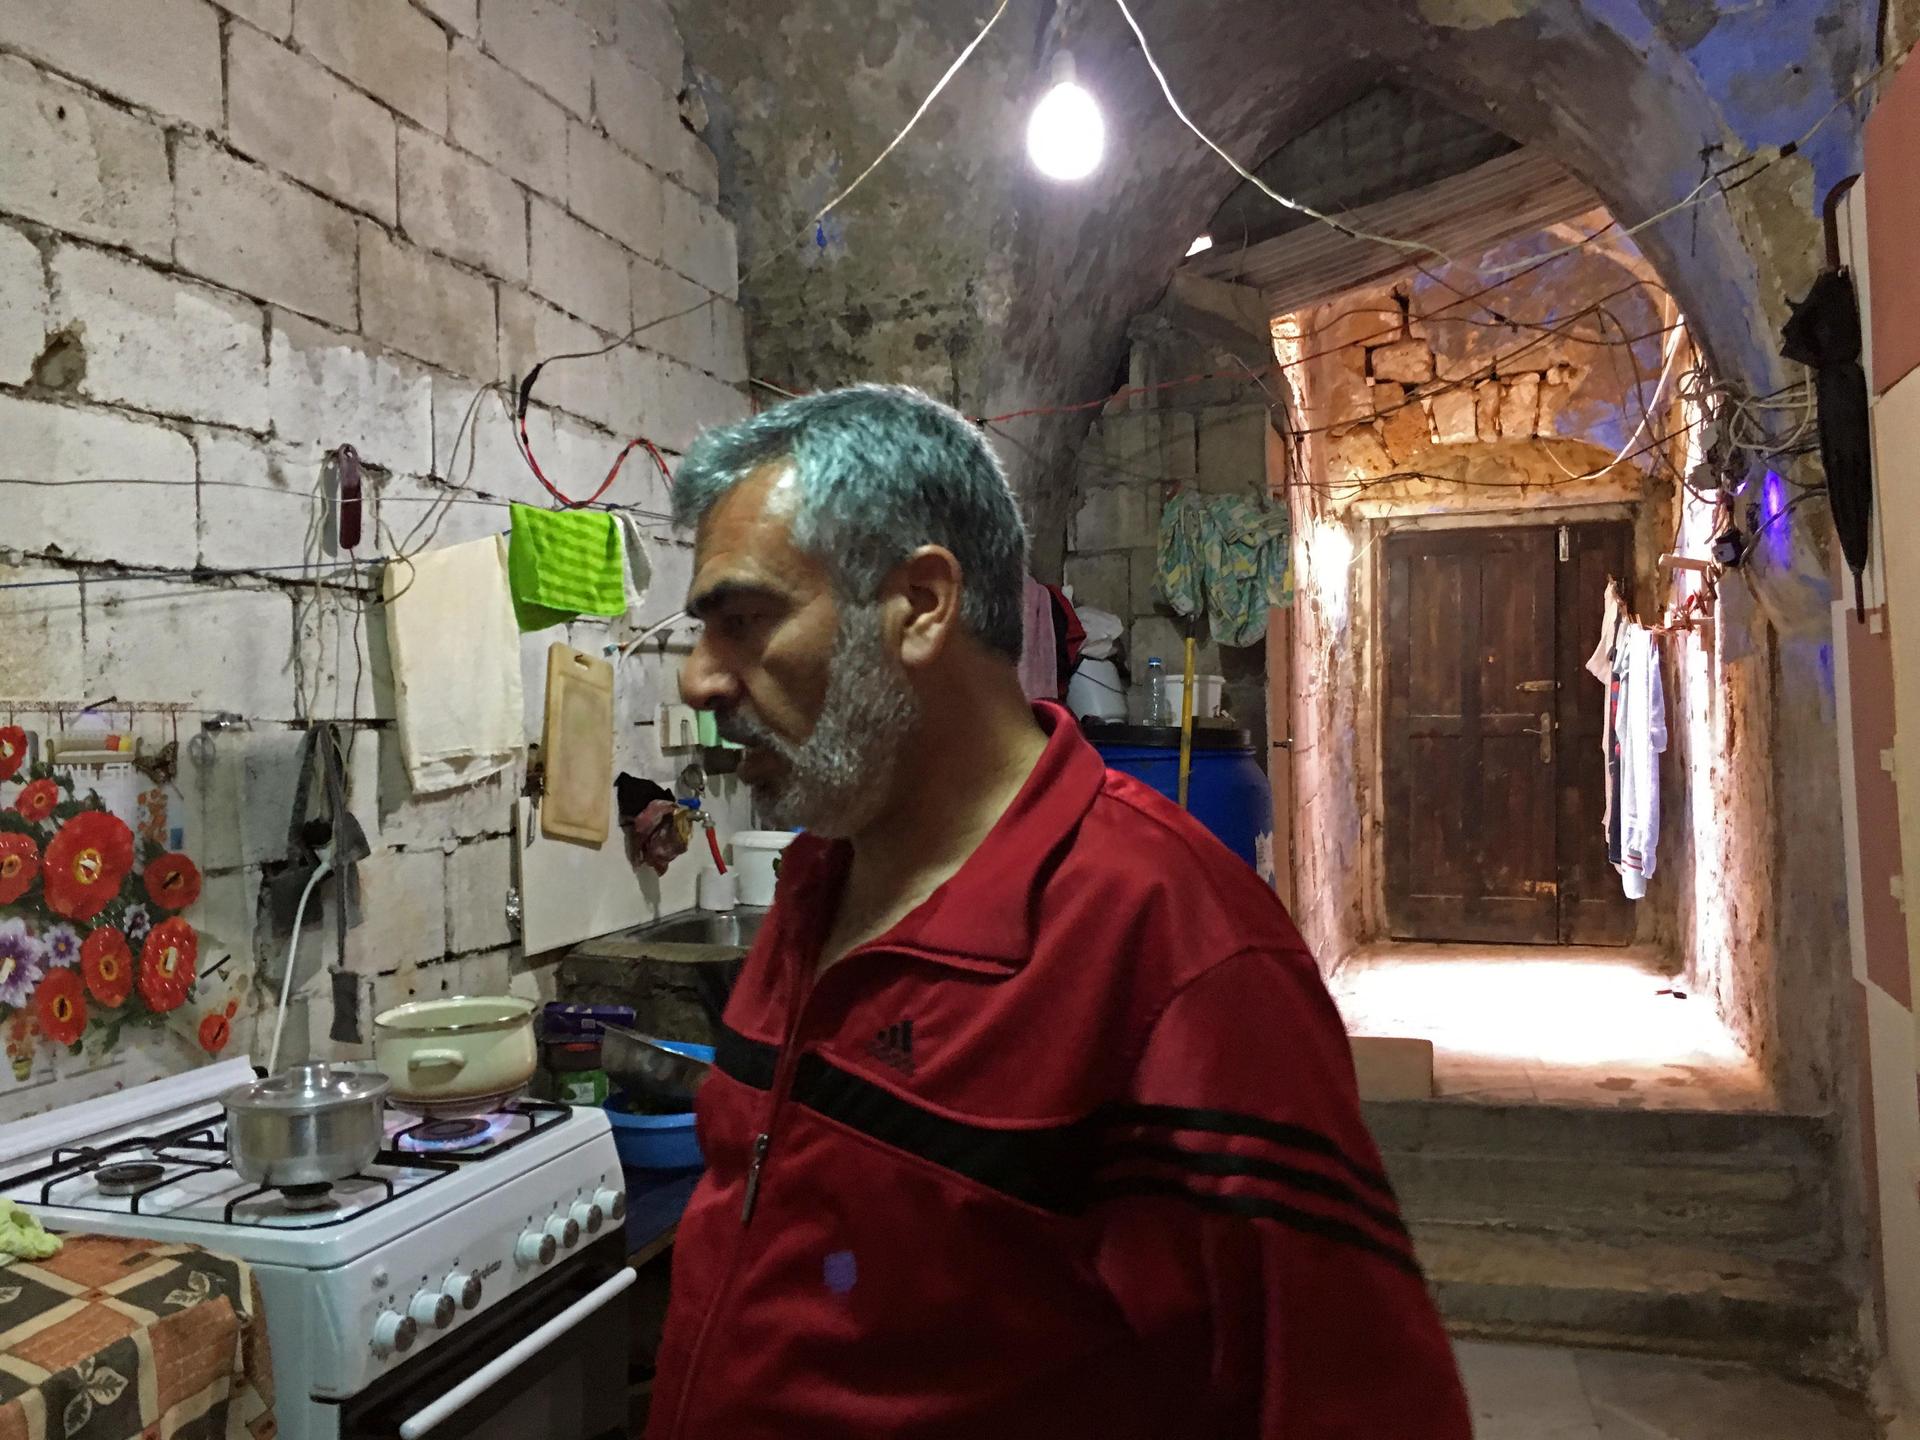 Jihad Al-Mohammed in his kitchen. He has a flat screen TV and a WiFi router where the synagogue used keep its Torah scrolls.